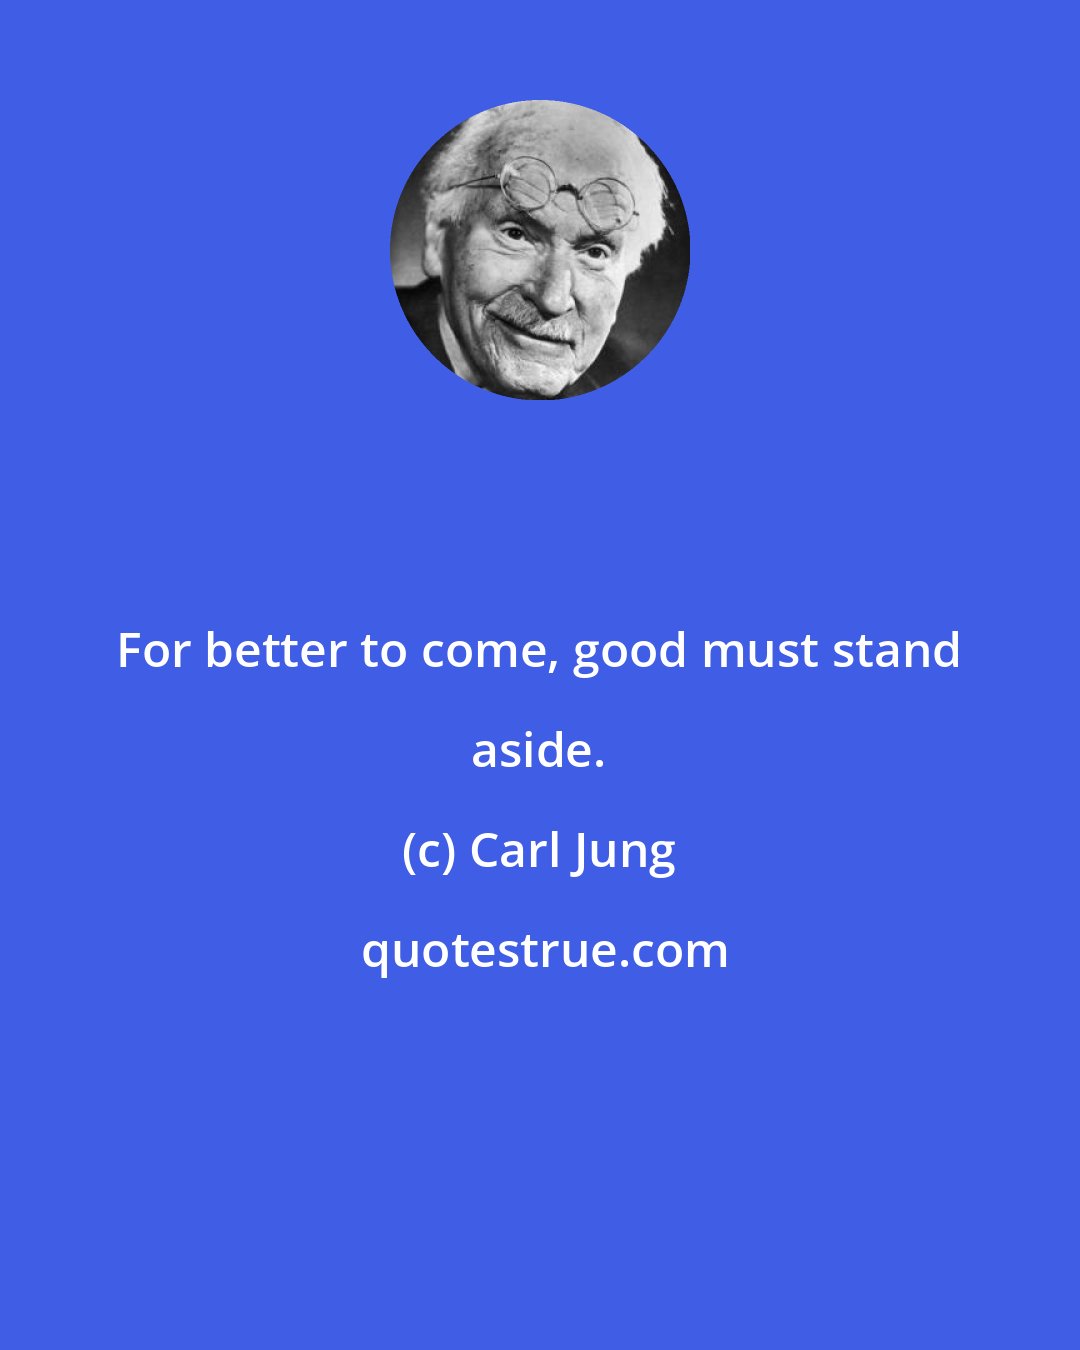 Carl Jung: For better to come, good must stand aside.